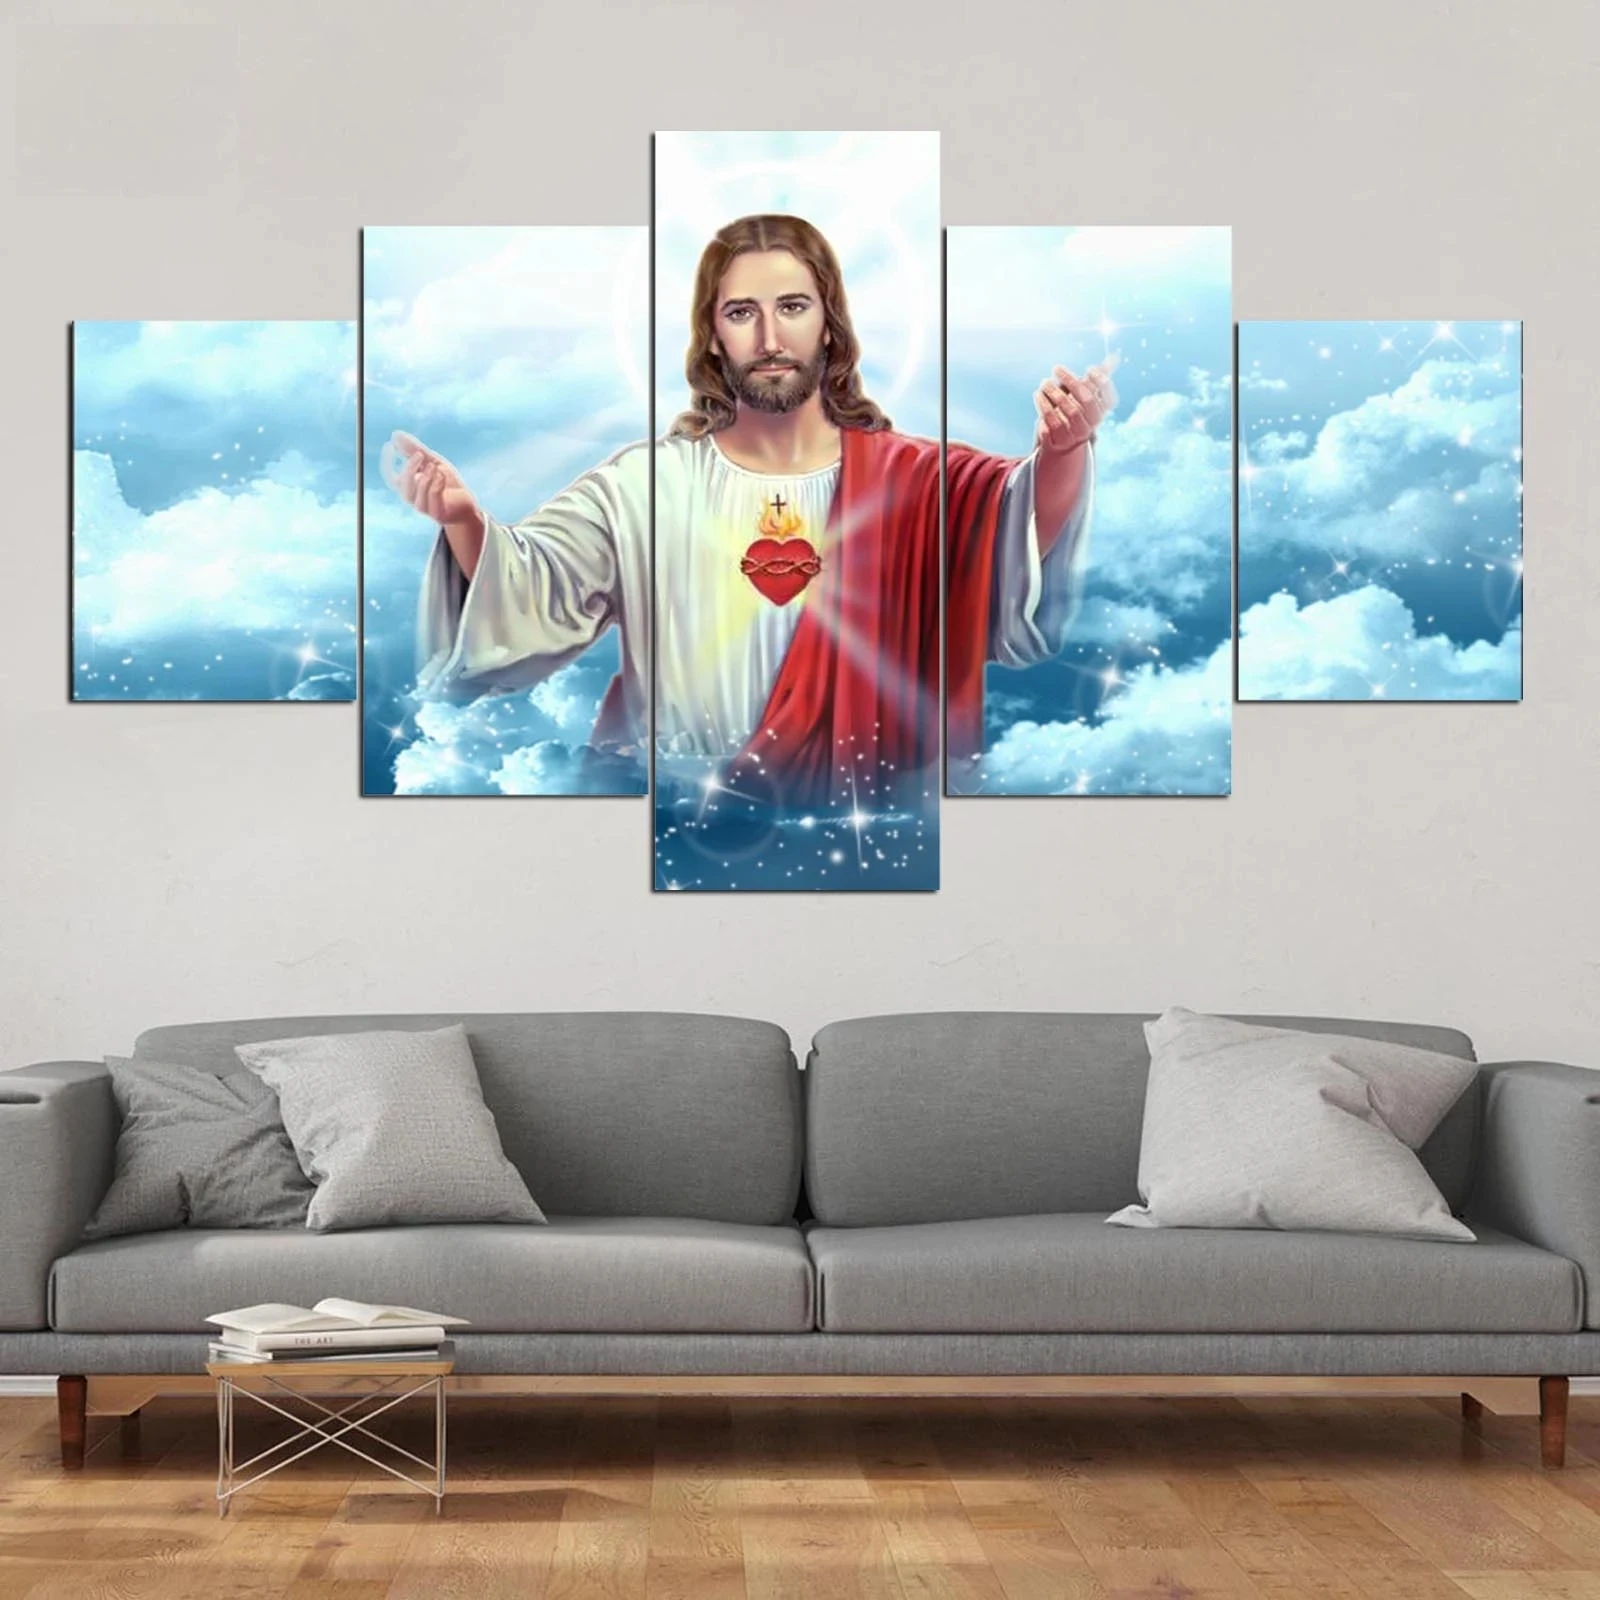 

Canvas Hd Prints Pictures Wall Jesus Artwork Painting 5 Panel Home Decor Modular Poster Framed For Living Room